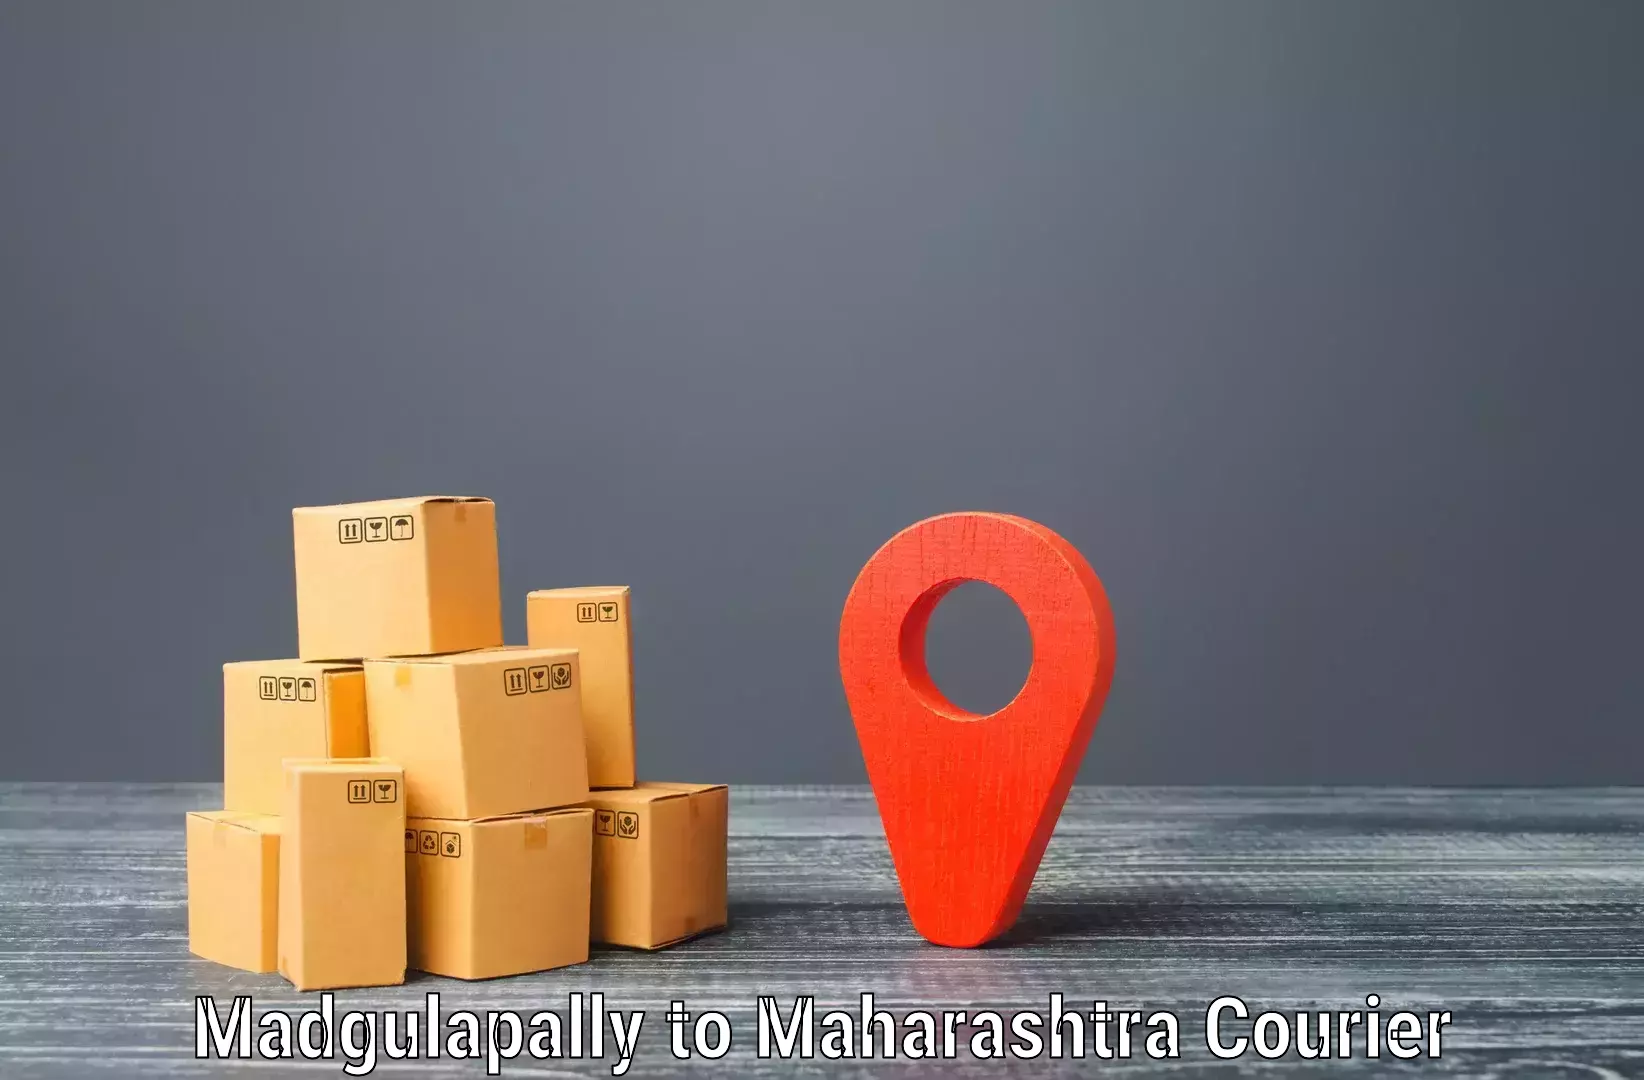 Affordable international shipping in Madgulapally to Umarkhed